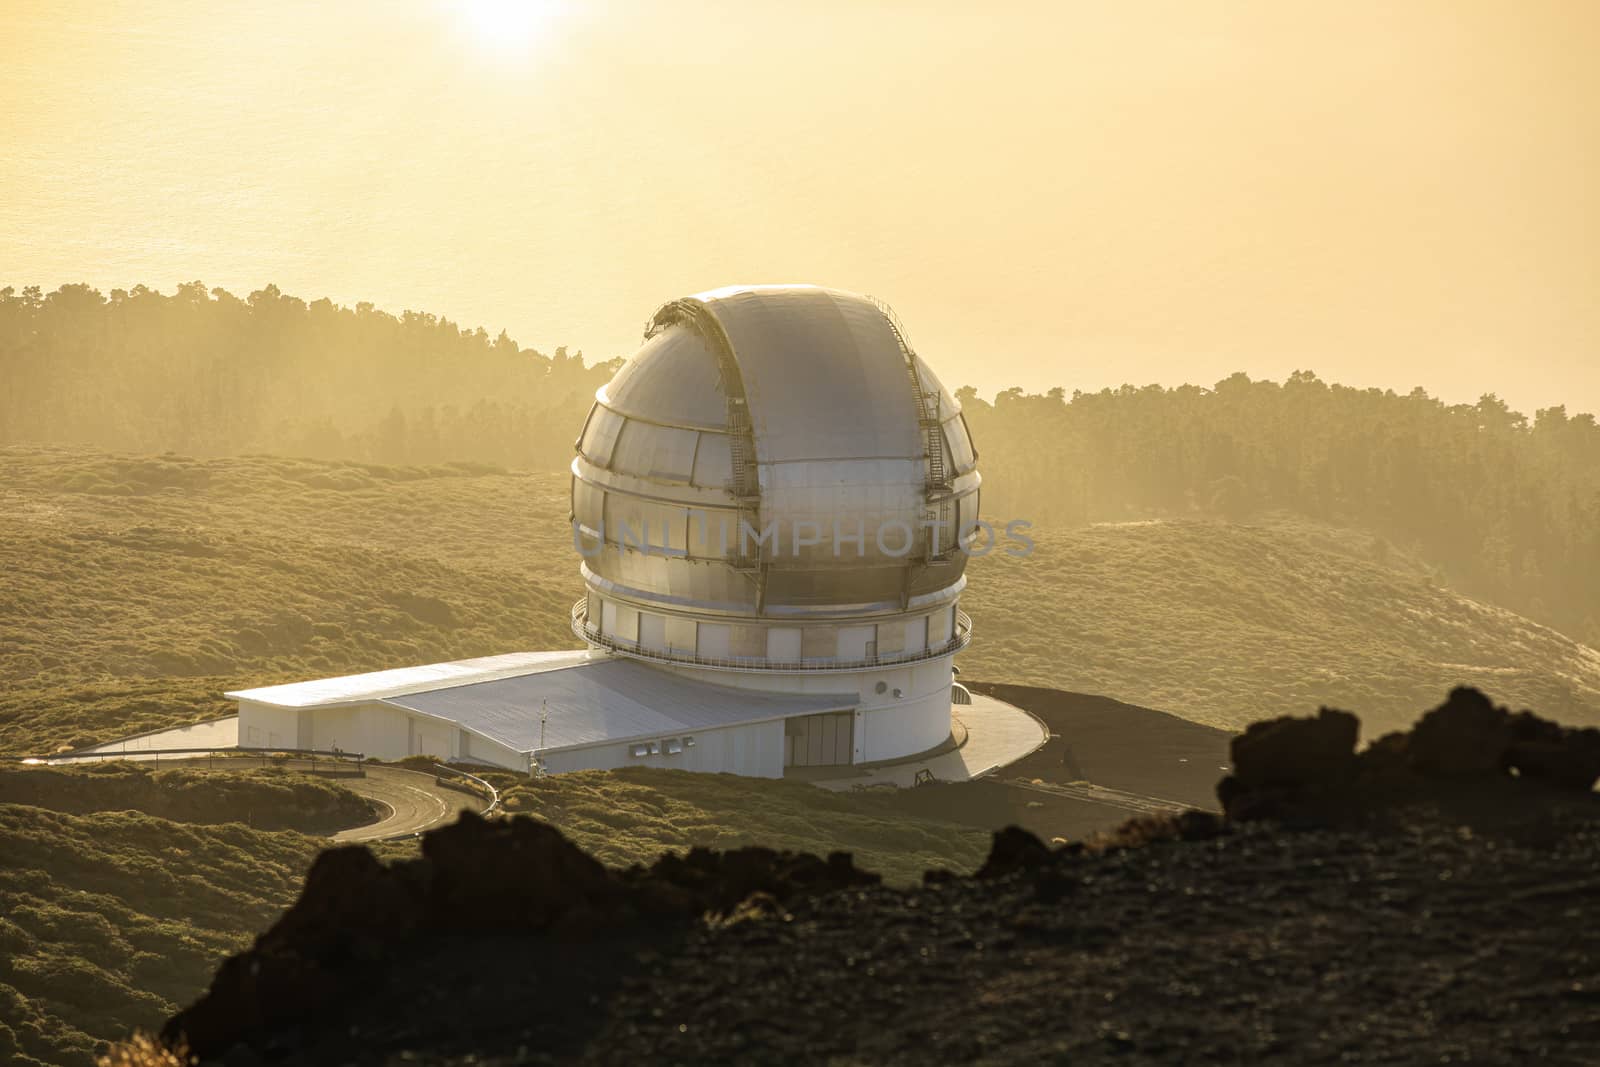 Roque de los Muchachos Observatory located on the highest mountain of La Palma, Canary Islands, Spain